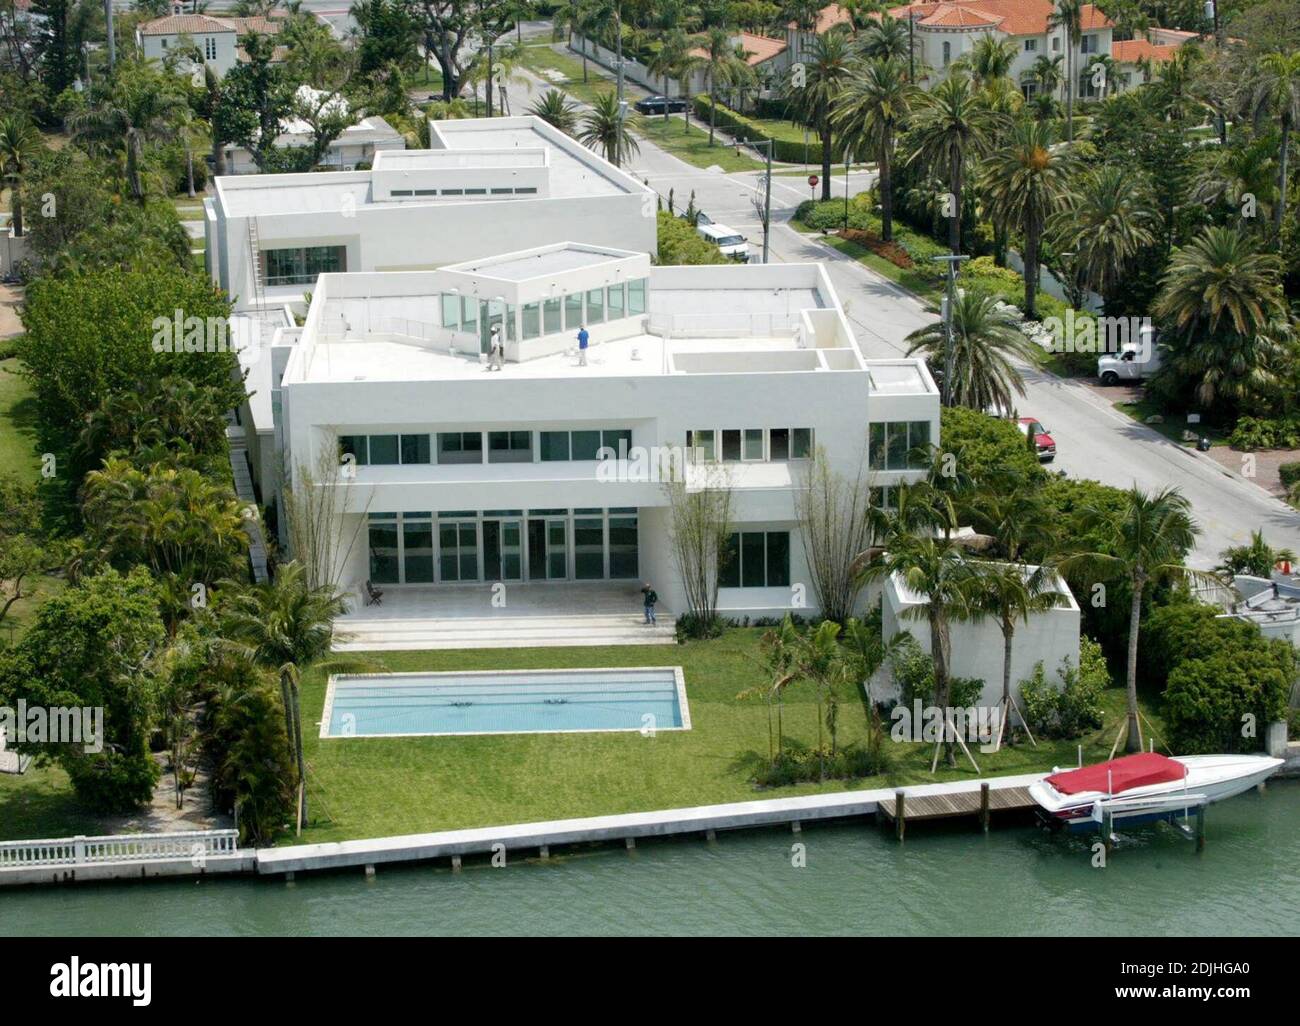 Exclusive!! This is the Miami Beach waterfront mansion that Hulk Hogan & Family have for $12m. The sprawling 18,000 sq ft home has 12 bedrooms, bathrooms and a boat dock.